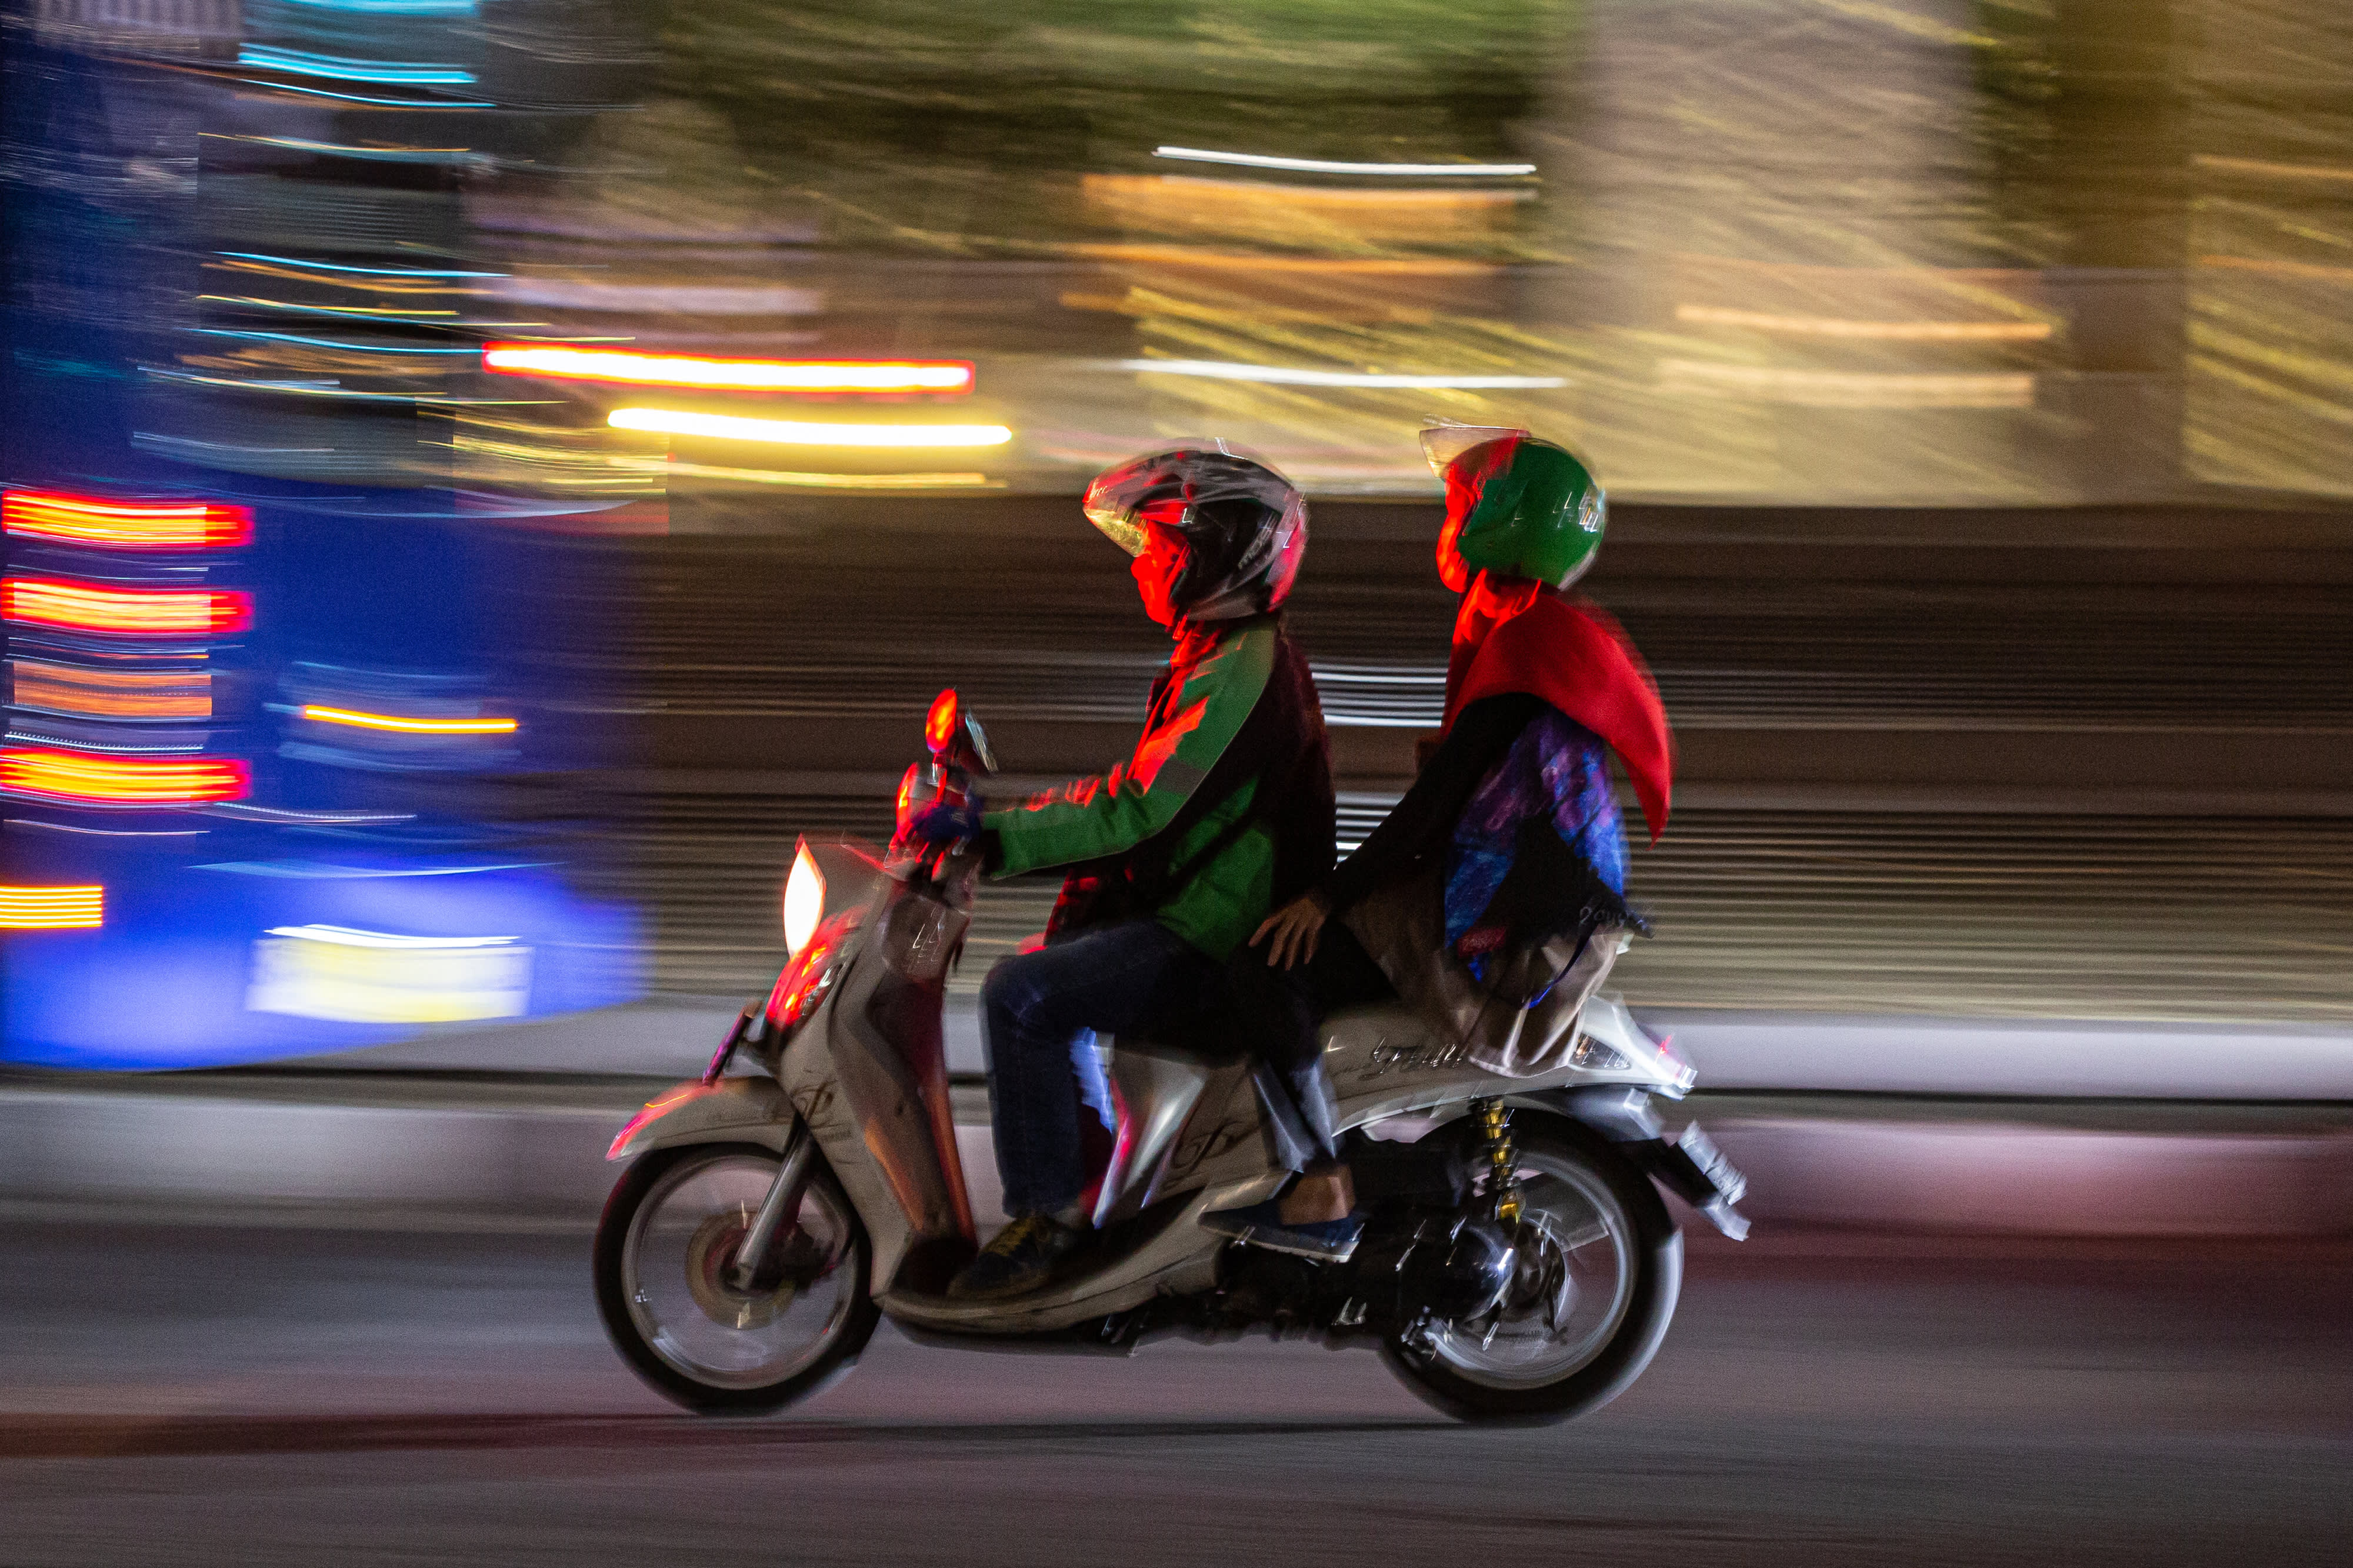 Indonesia’s Gojek wants all vehicles on its app to be electric by 2030